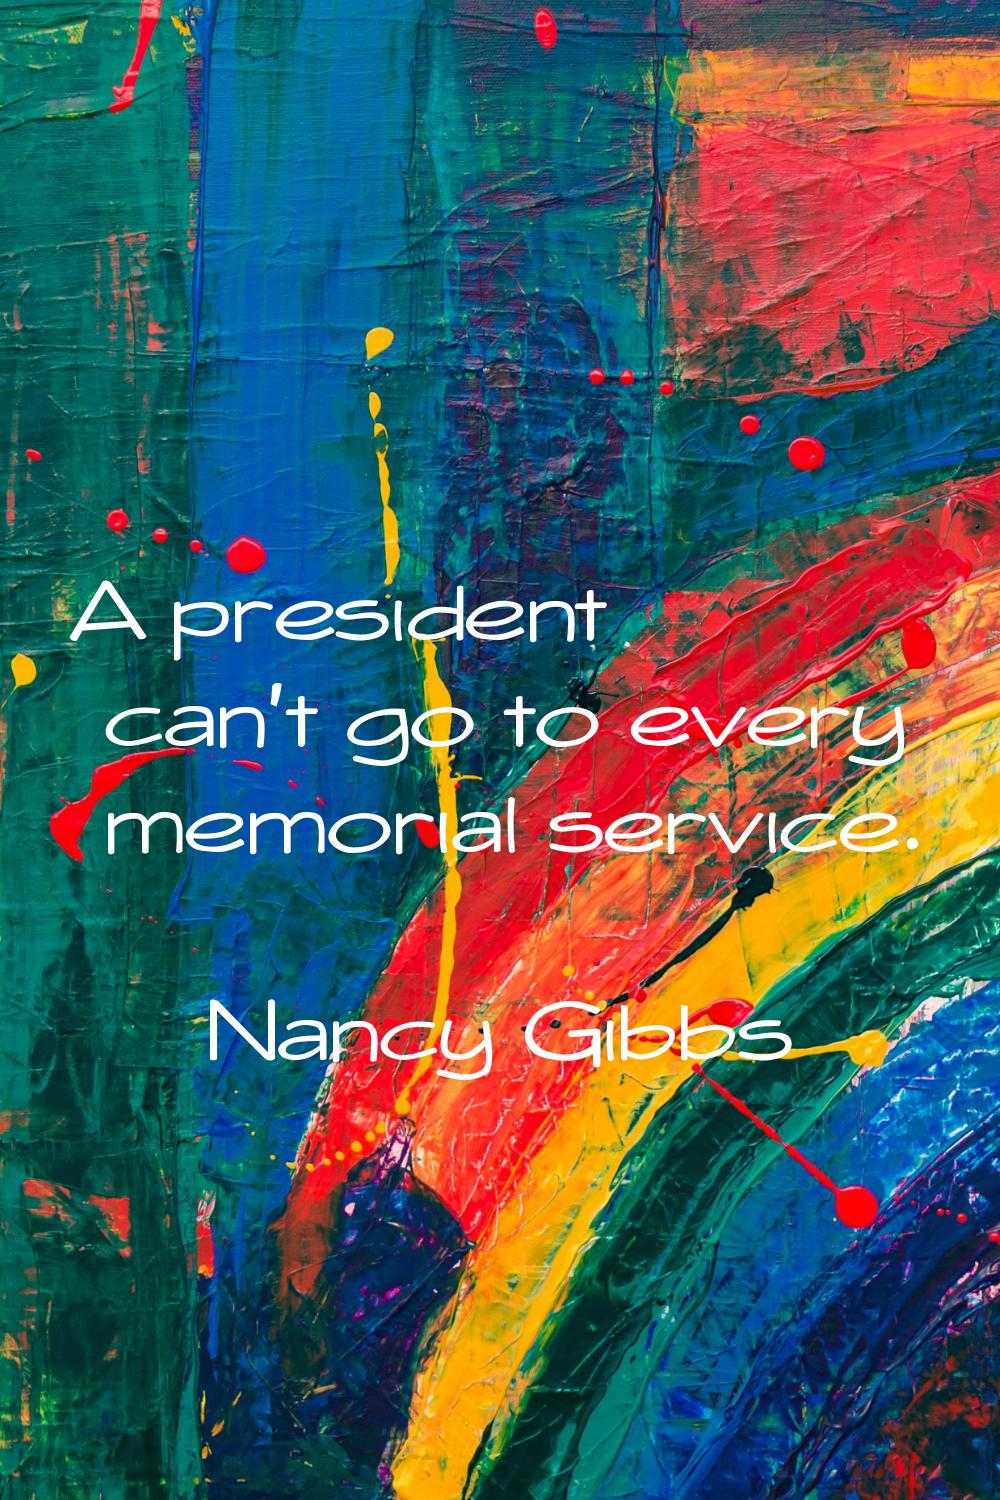 A president can't go to every memorial service.